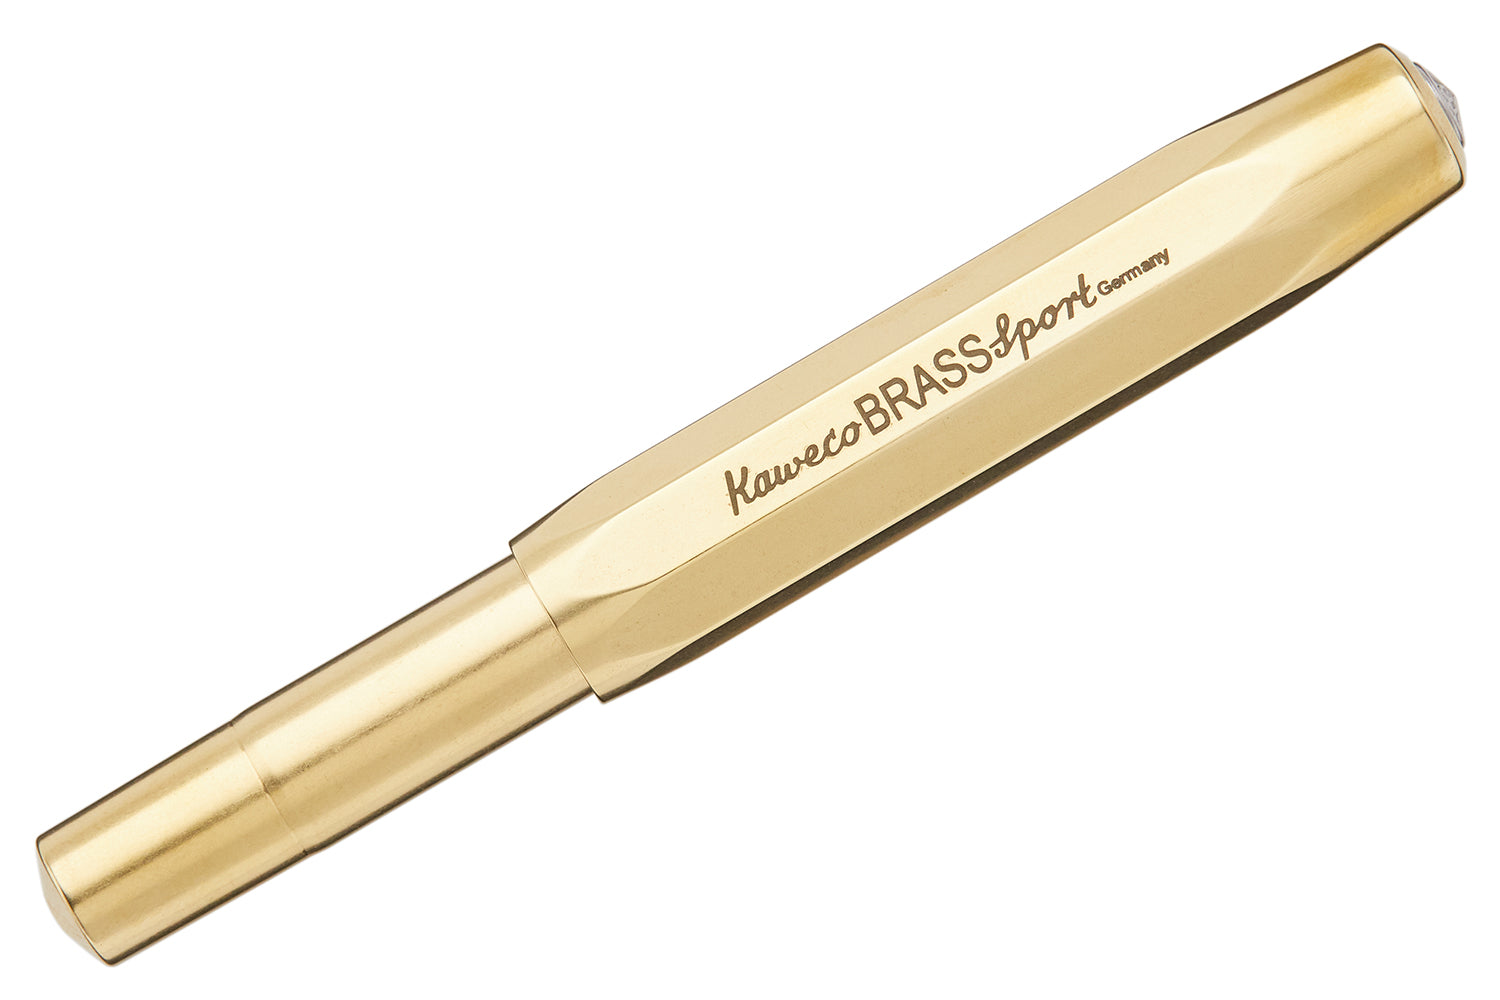 Kaweco Brass Sport Fountain Pen, Made Out of Real Metal, Feed Flows  Smoothly Without Wasting Ink. Soft Writing Feeling.